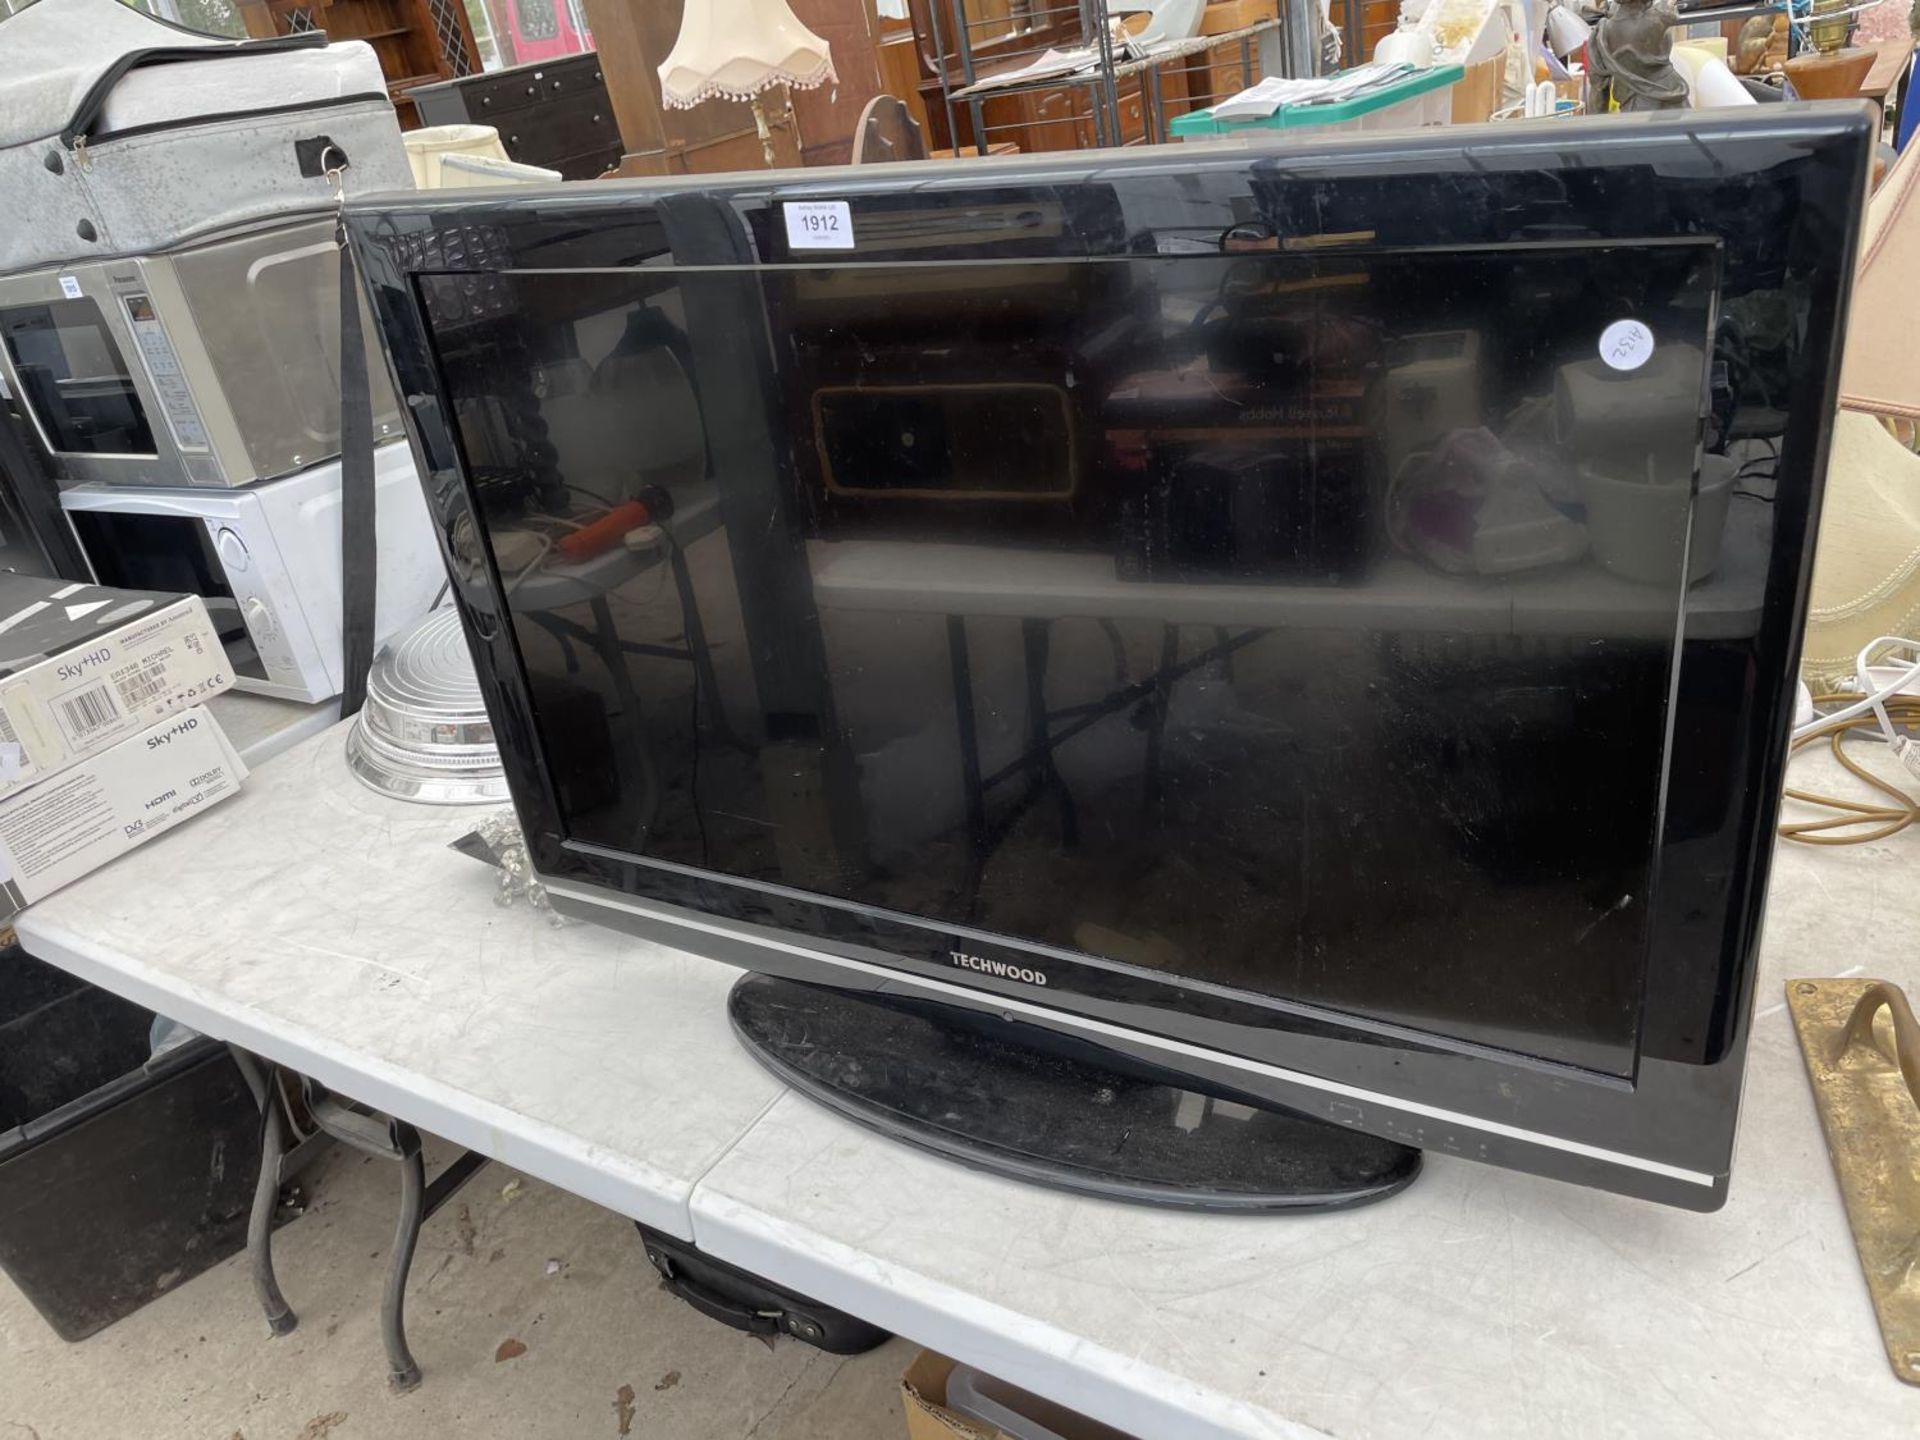 A 32" TECHWOOD TELEVISION